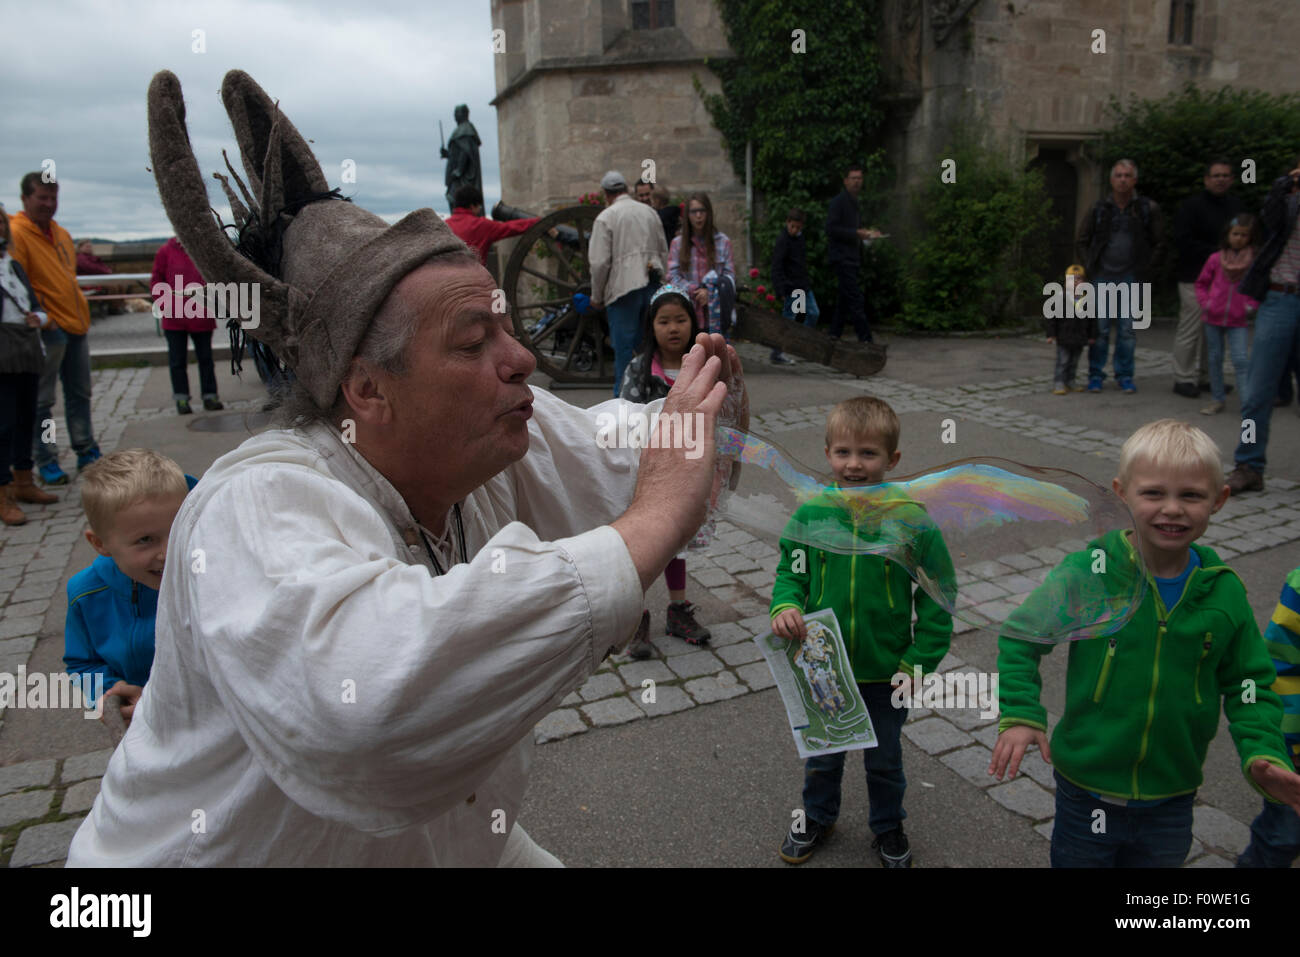 A street performer blows giant soap bubbles to entertain children at Hohenzollern castle, Baden-Wuerttemberg, Germany Stock Photo